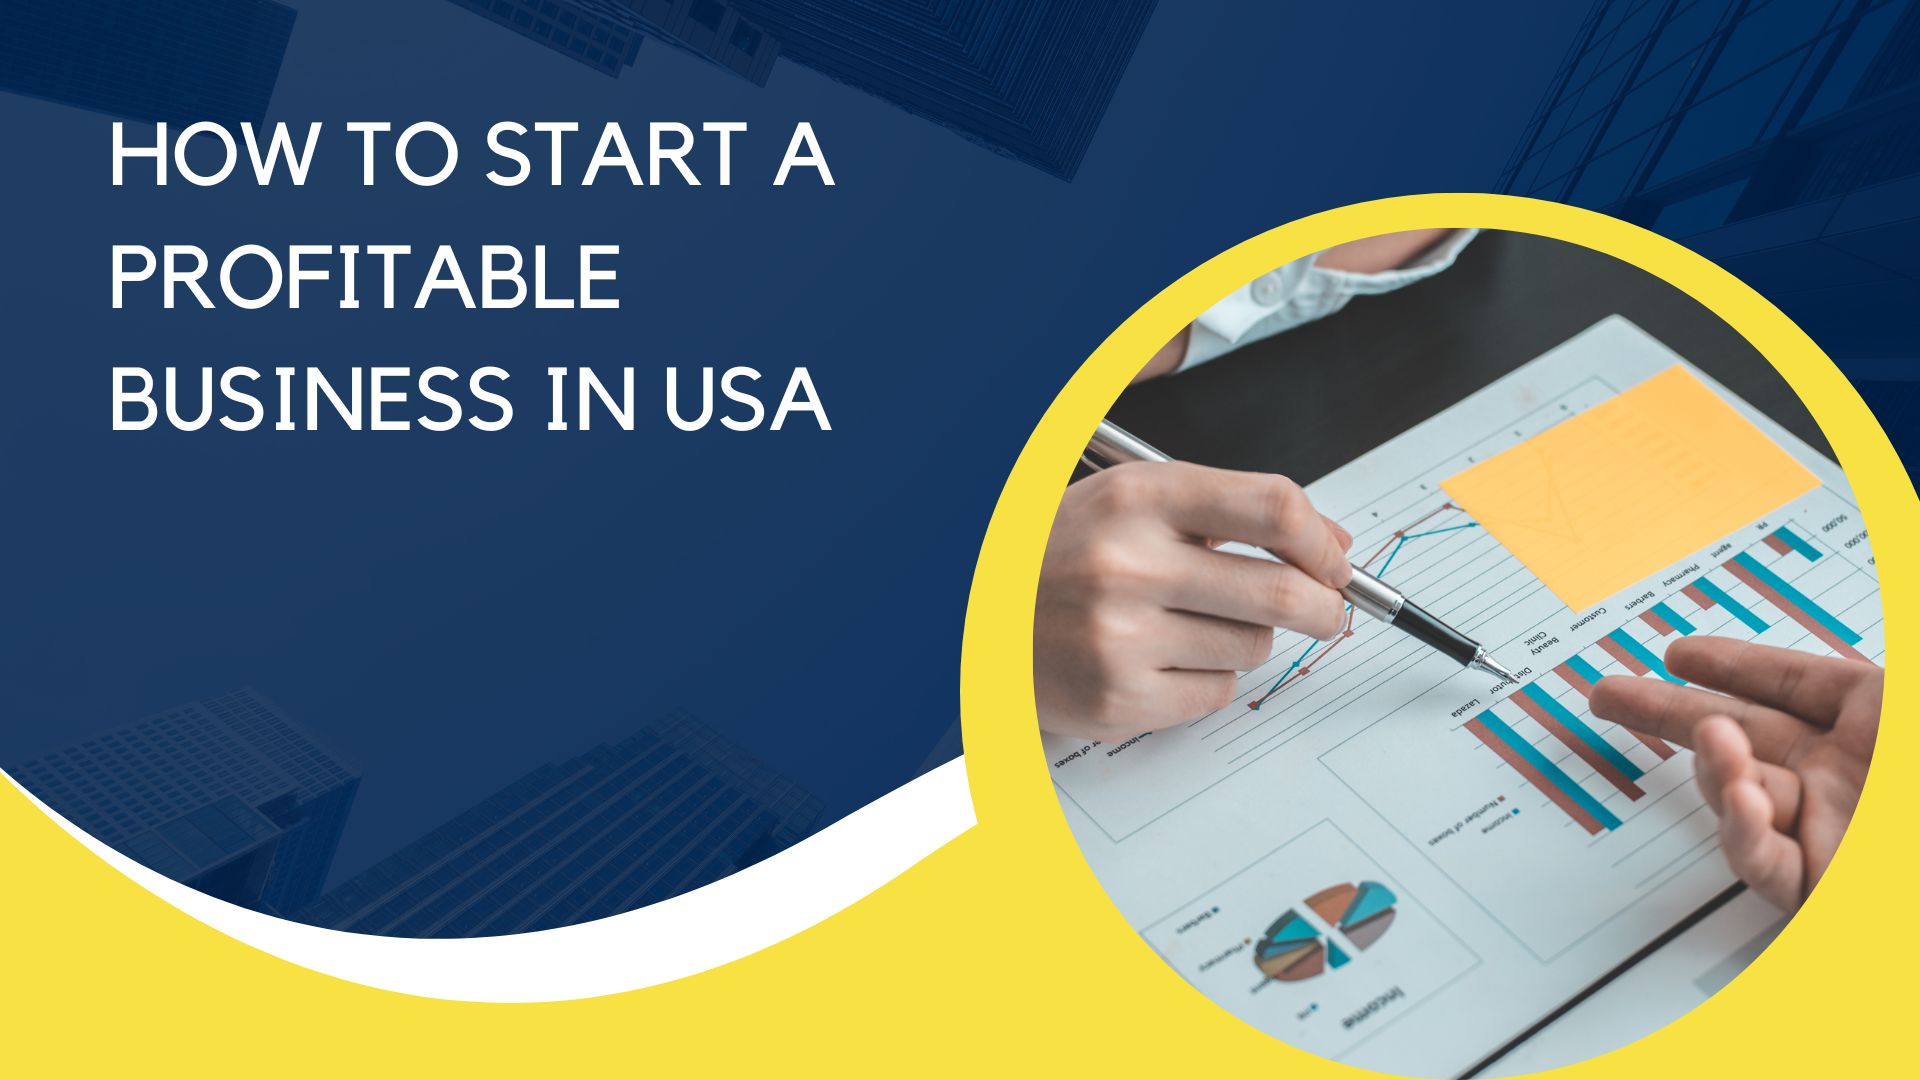 How to Start a Profitable Business in USA